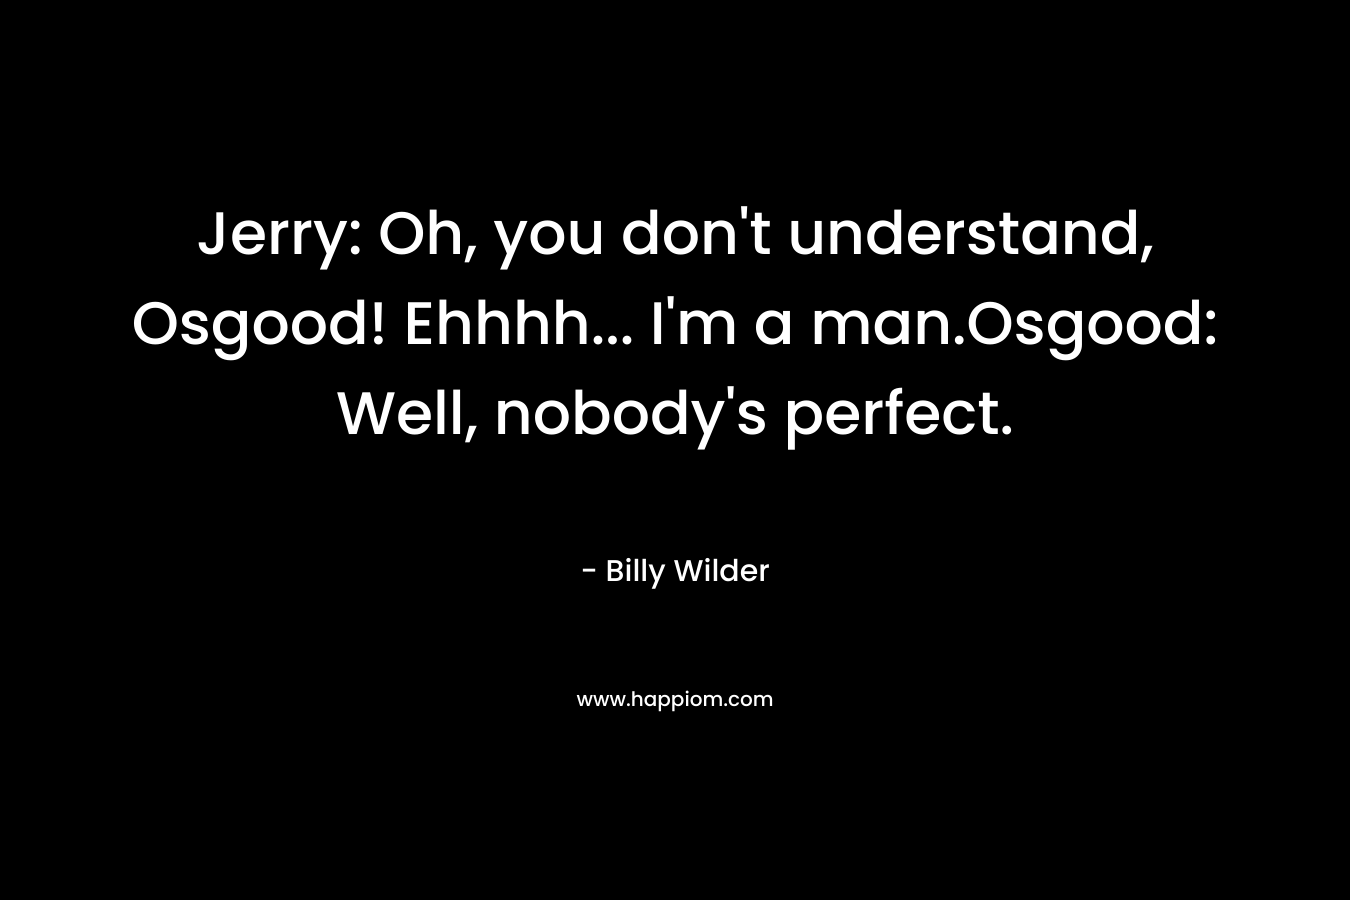 Jerry: Oh, you don’t understand, Osgood! Ehhhh… I’m a man.Osgood: Well, nobody’s perfect. – Billy Wilder